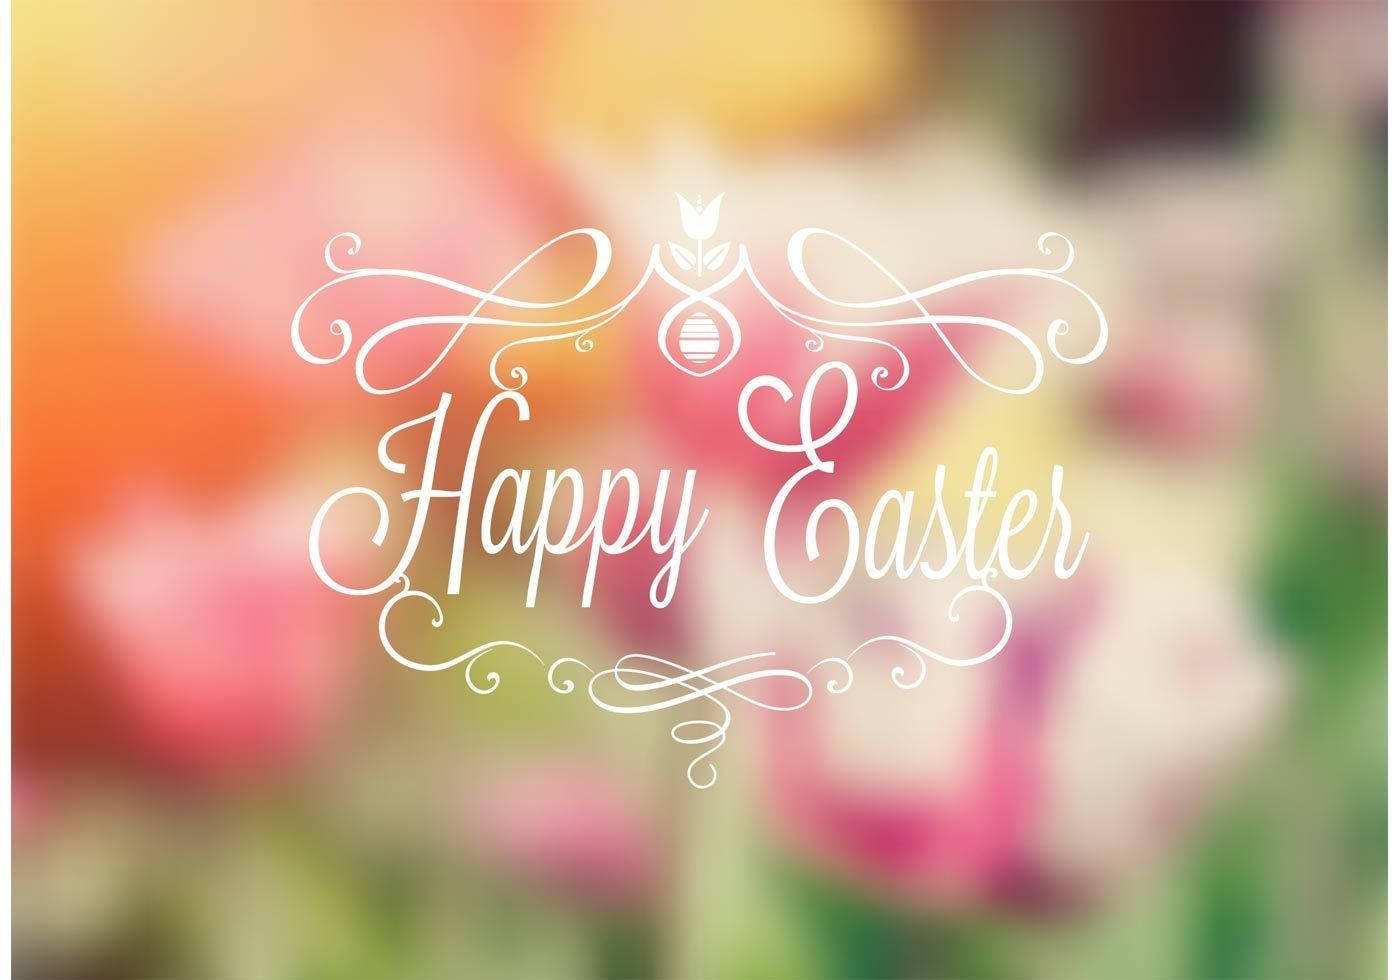 Happy Easter Calligraphy Over Blurry Flowers Background